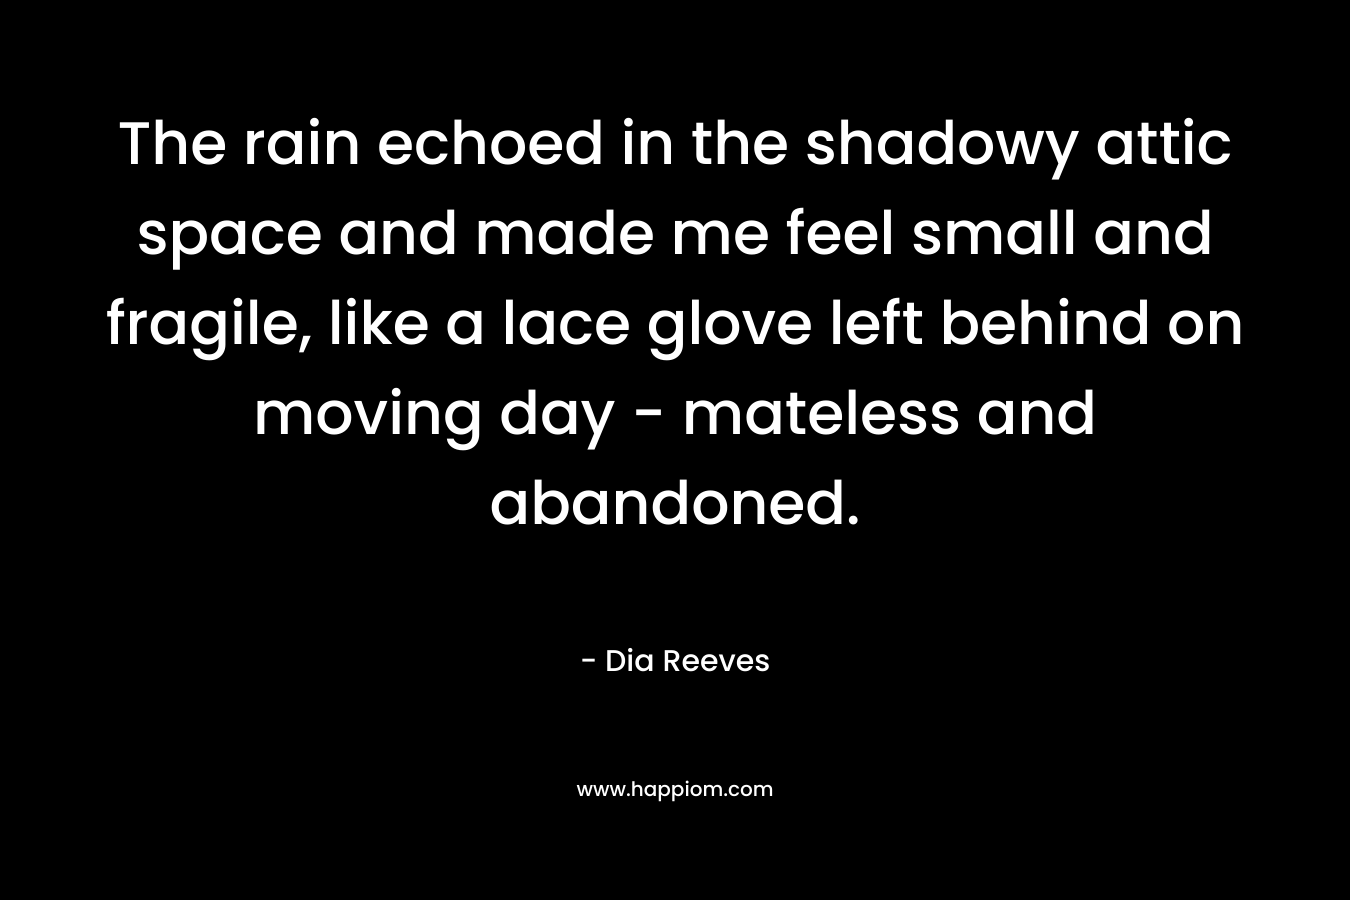 The rain echoed in the shadowy attic space and made me feel small and fragile, like a lace glove left behind on moving day – mateless and abandoned. – Dia Reeves